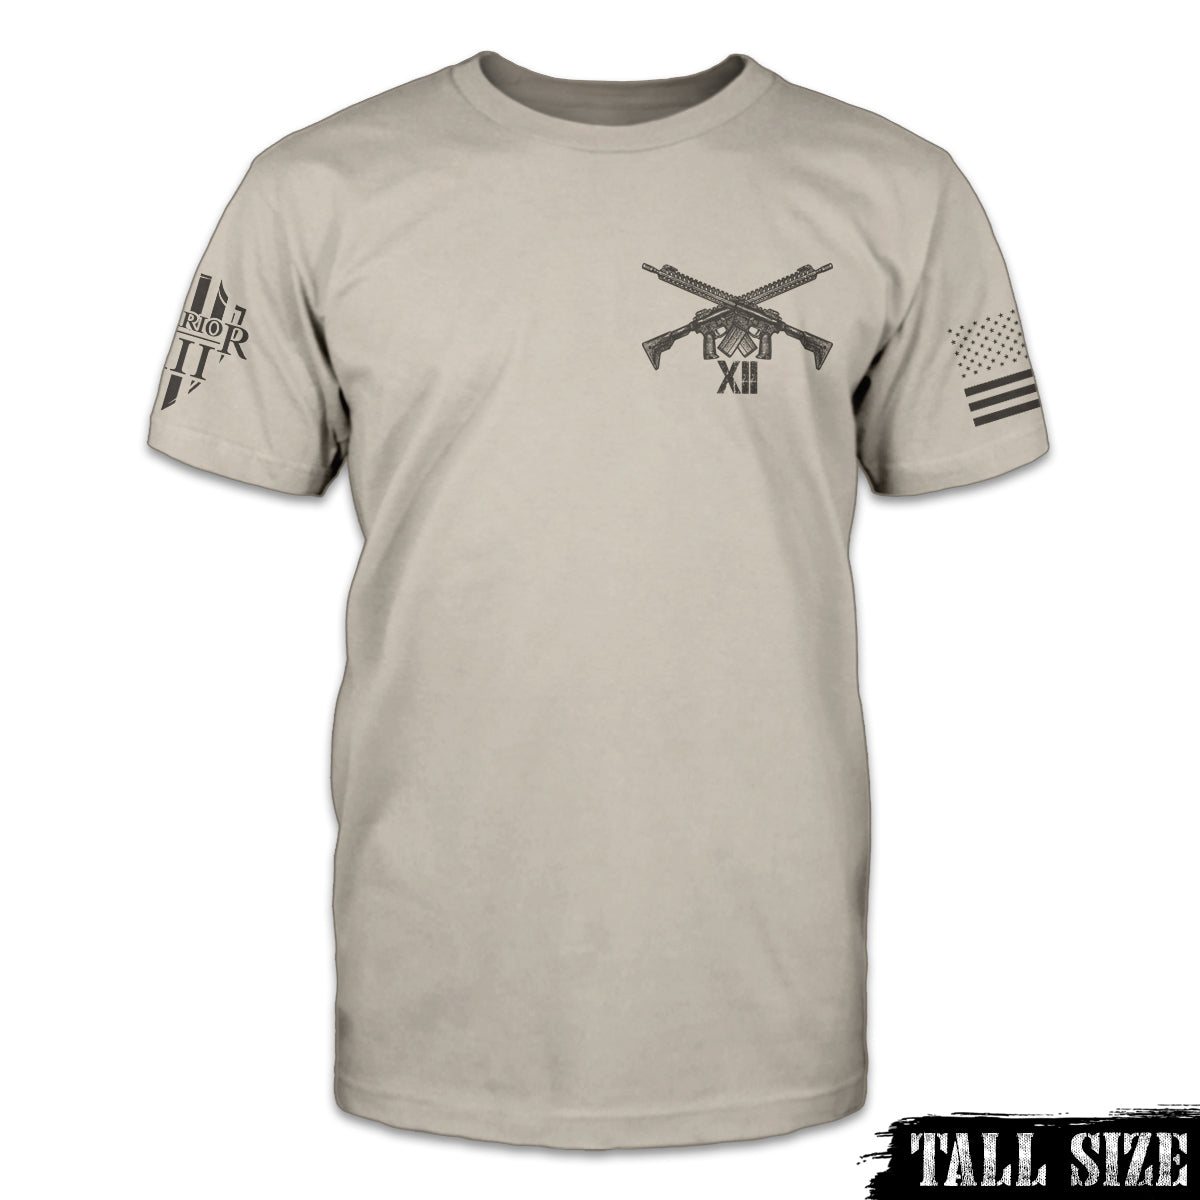 A light tan tall size shirt with two guns crossed over printed on the front.